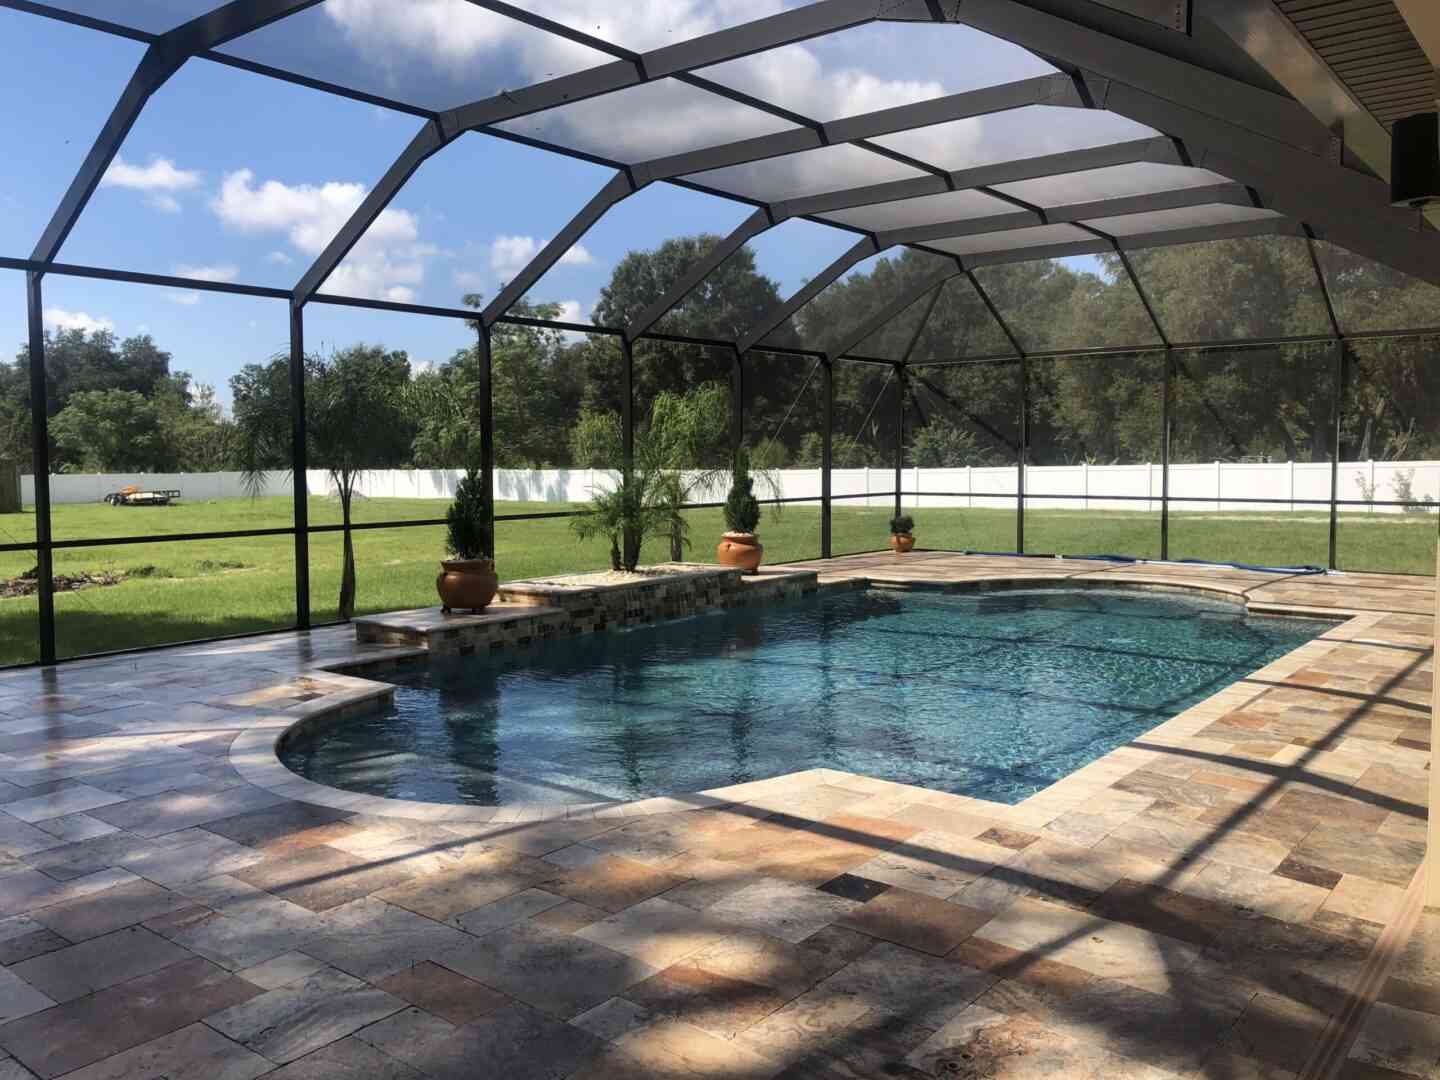 A pool with a sun roof